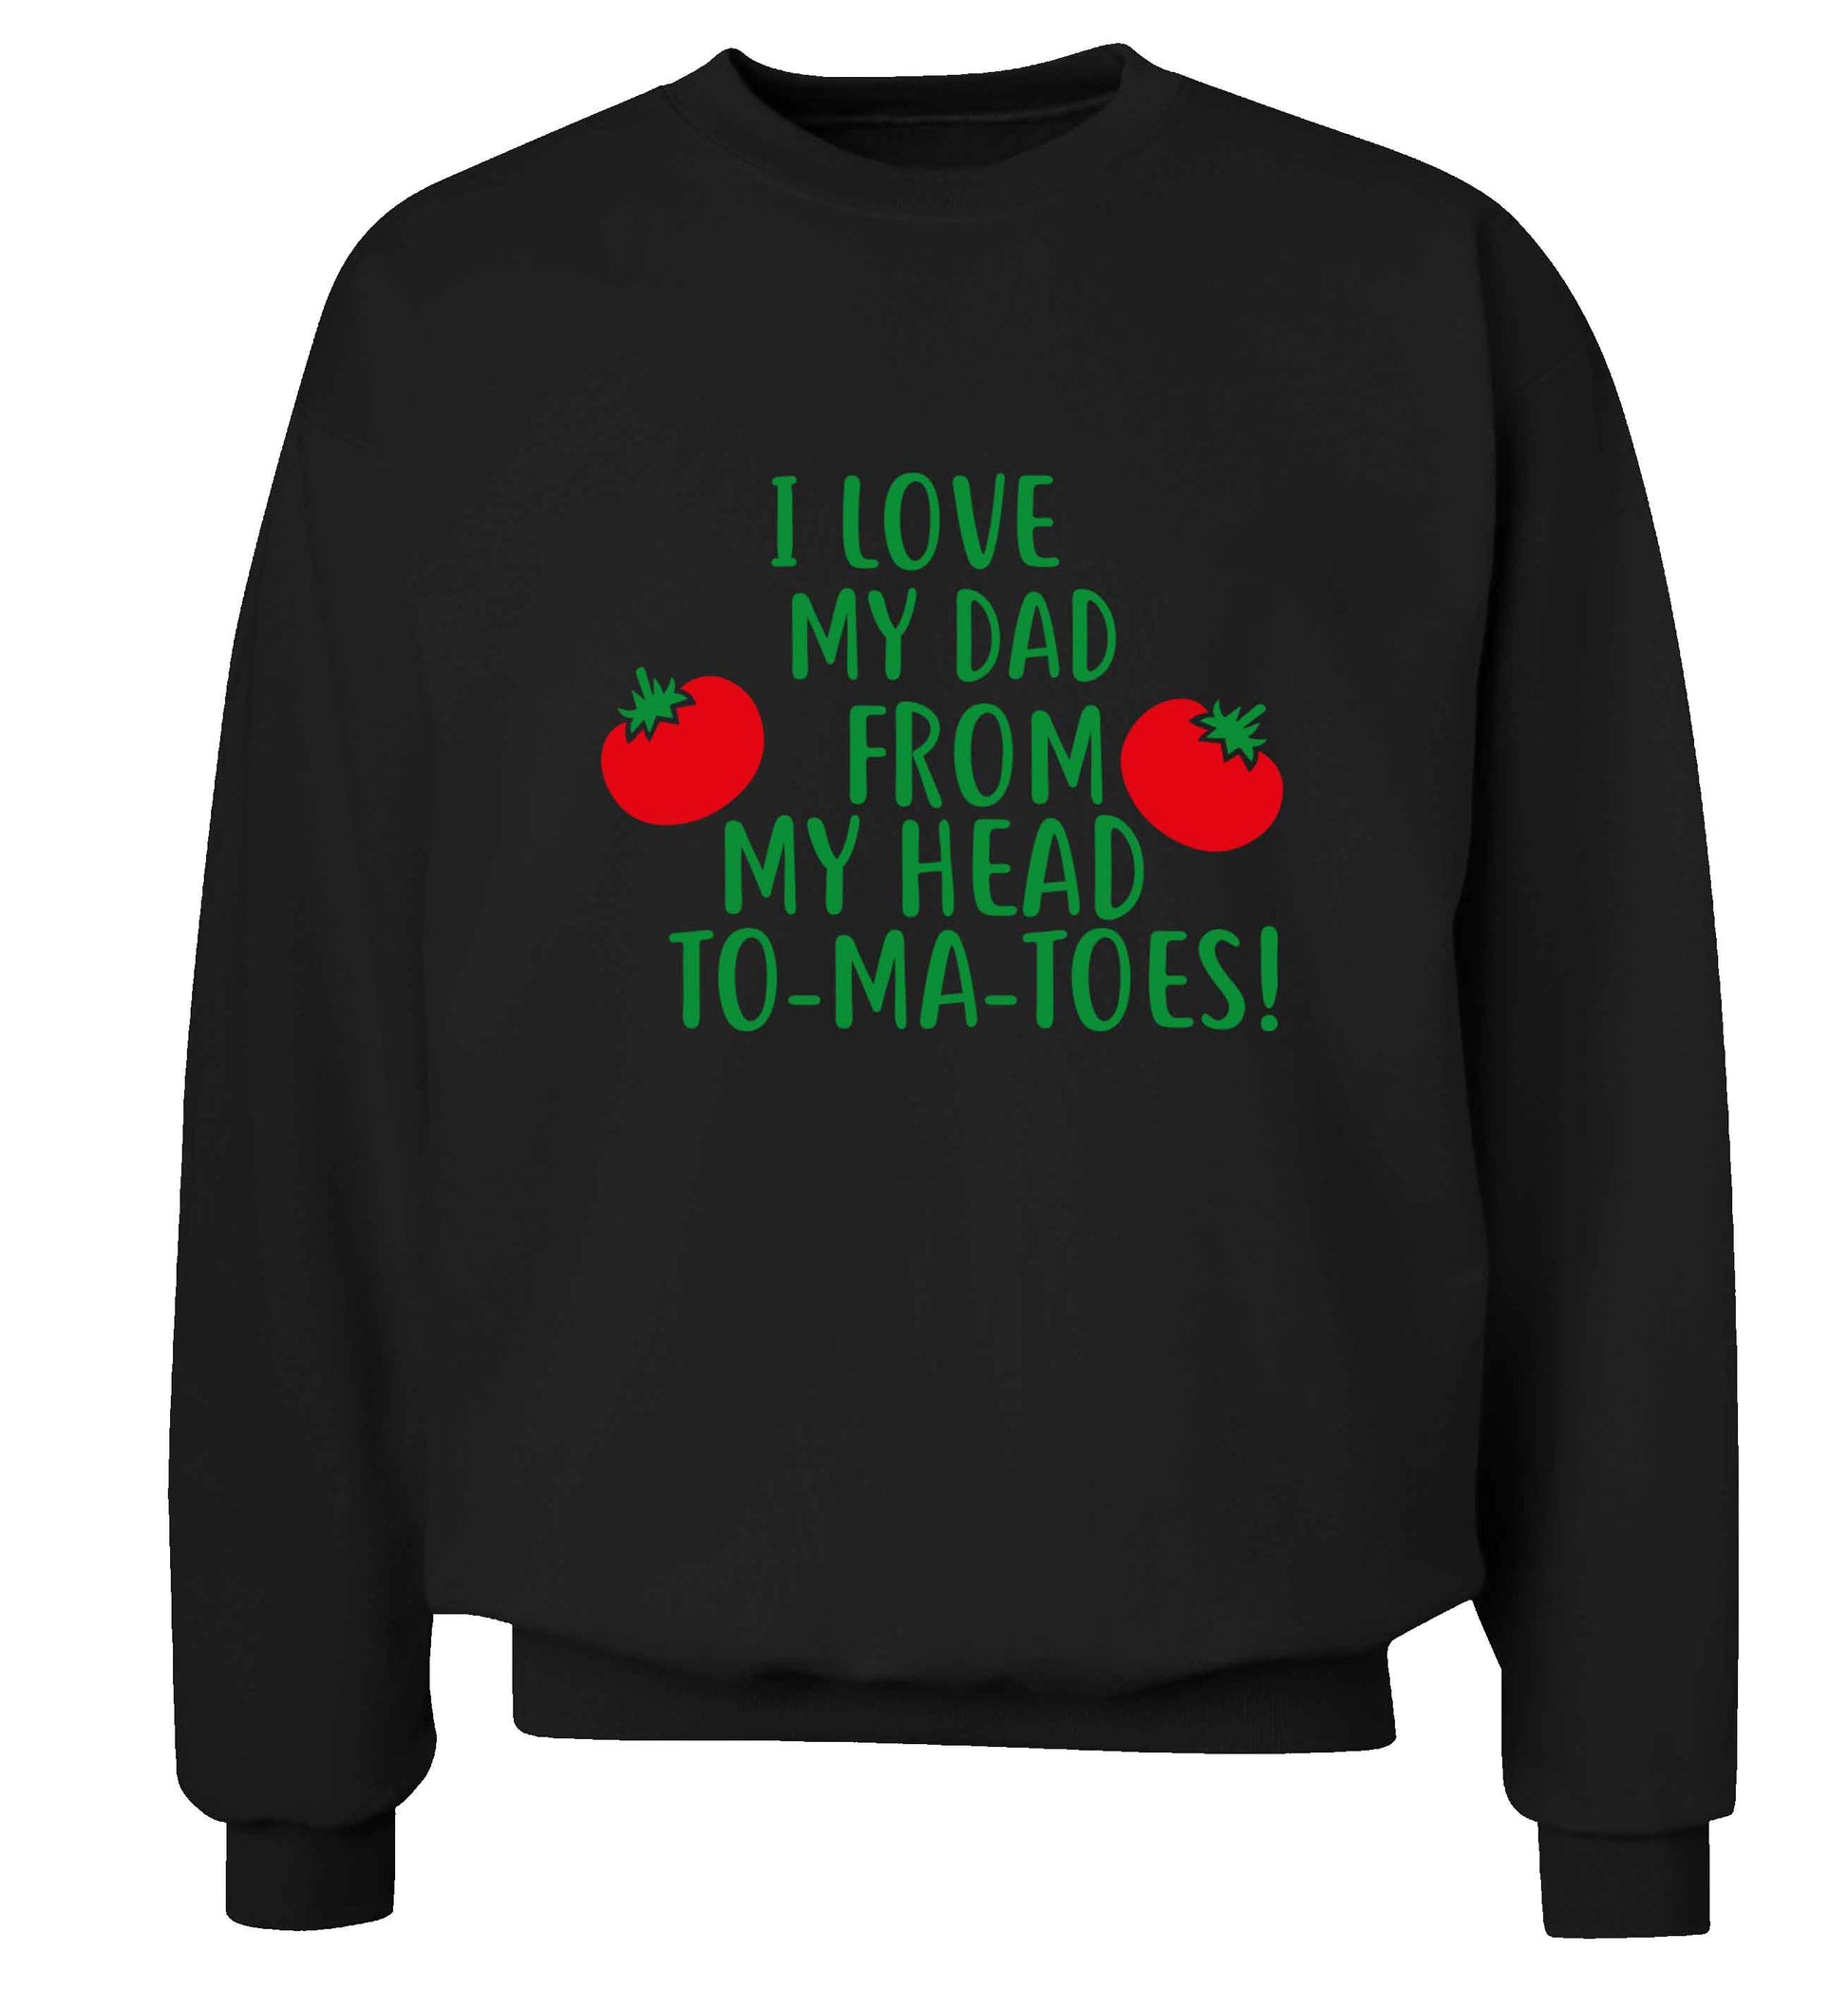 I love my dad from my head to-ma-toes adult's unisex black sweater 2XL